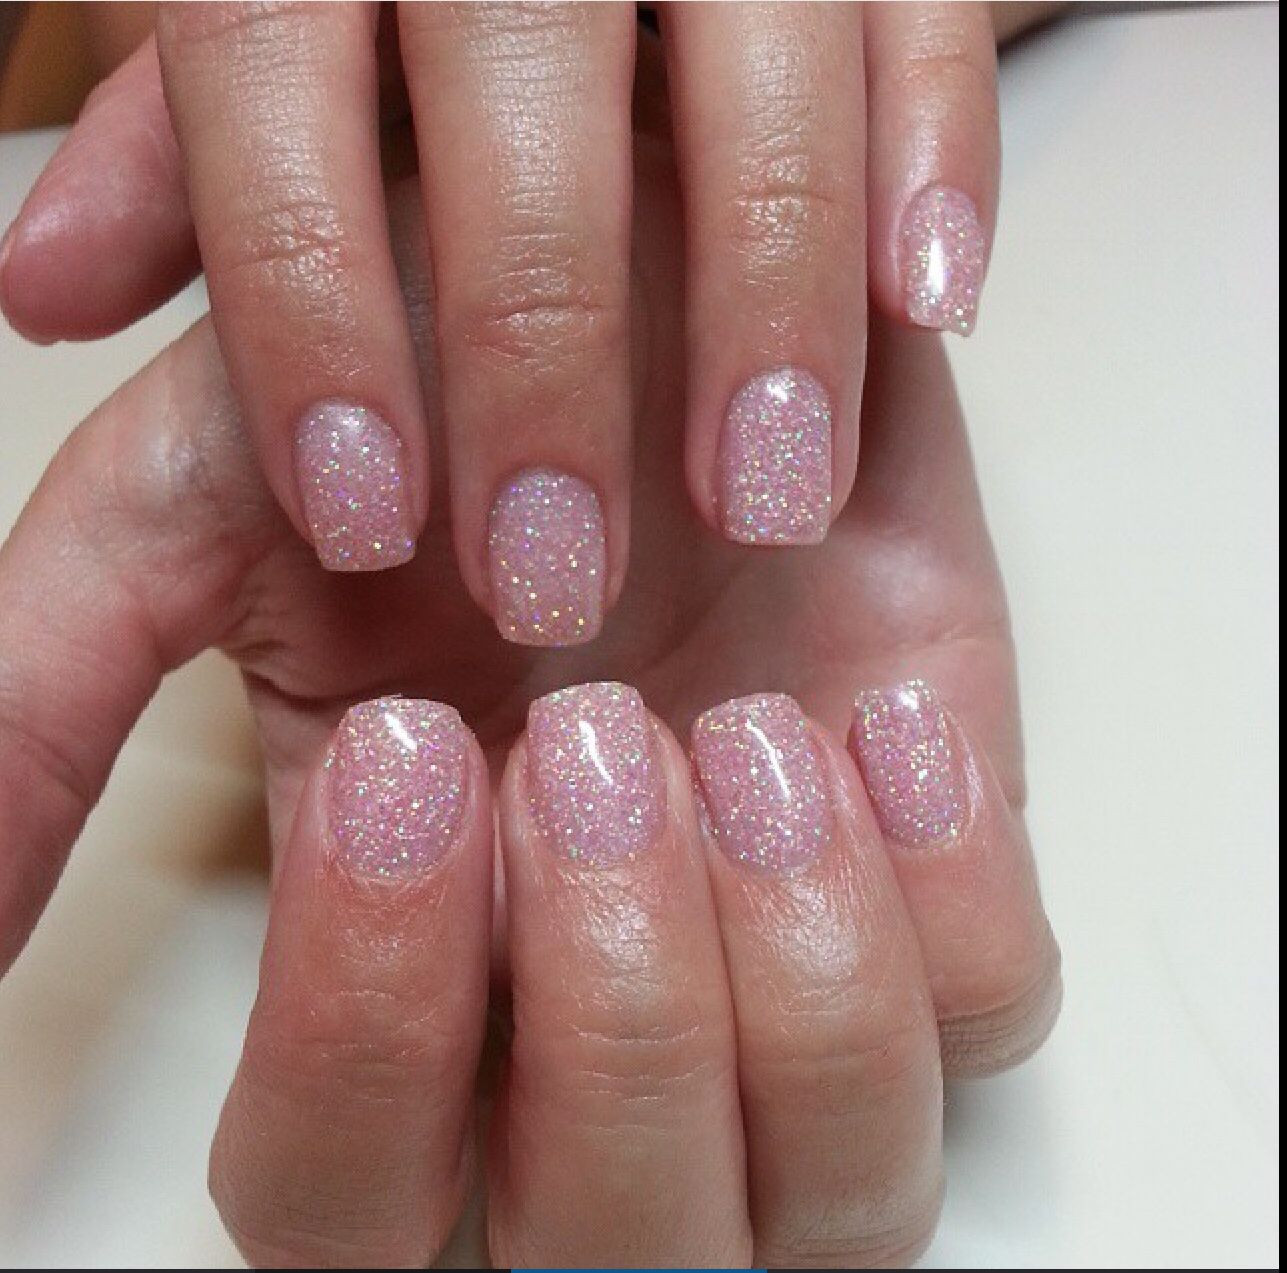 Square Glitter Nails
 I really love this one Pink glitter short square nails